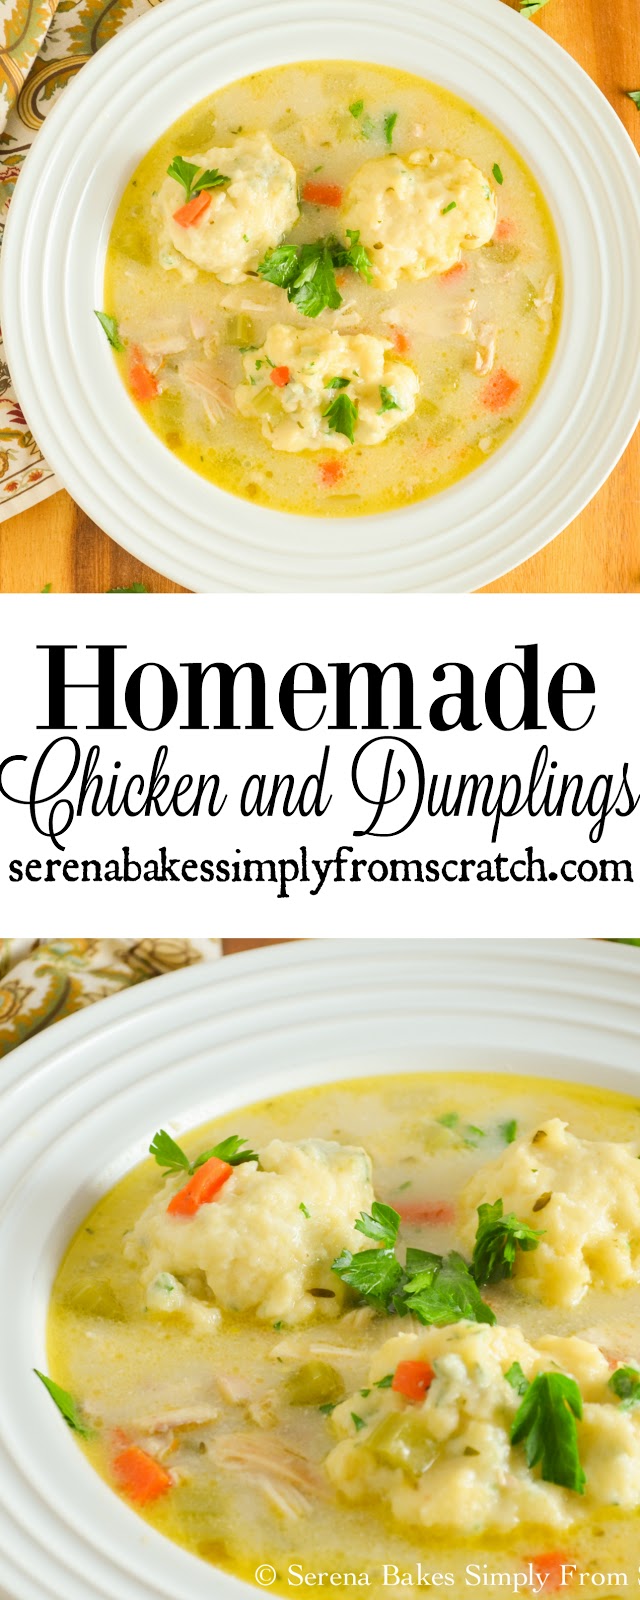 Homemade Chicken and Dumplings | Serena Bakes Simply From Scratch